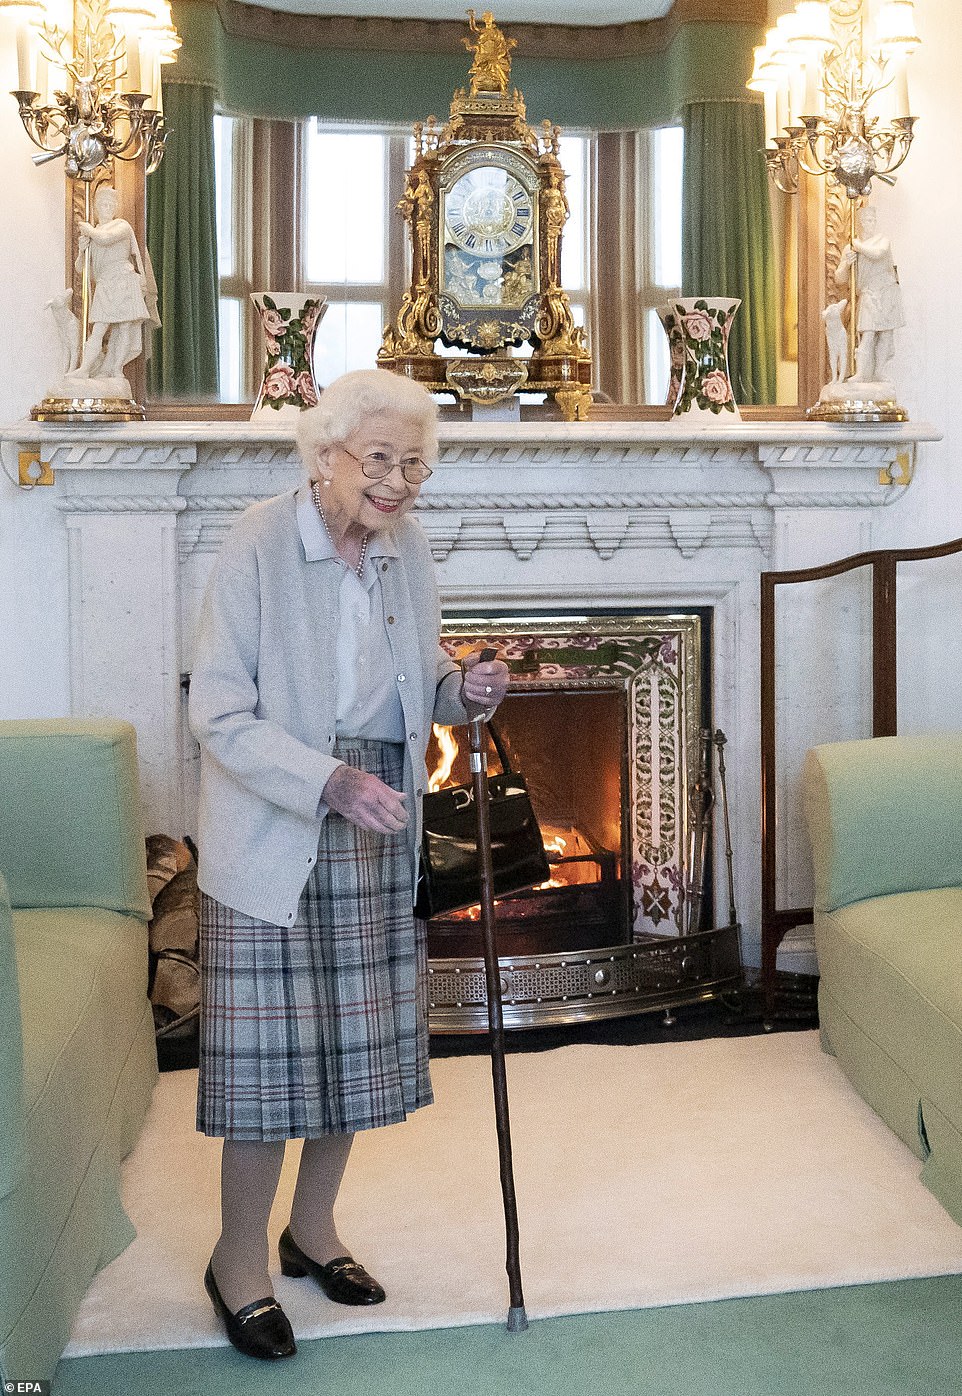 SERVICE LIFE: The Queen, with her cane and a bruise on her hand, smiles on Tuesday as she receives outgoing Prime Minister Boris Johnson and his successor Liz Truss.